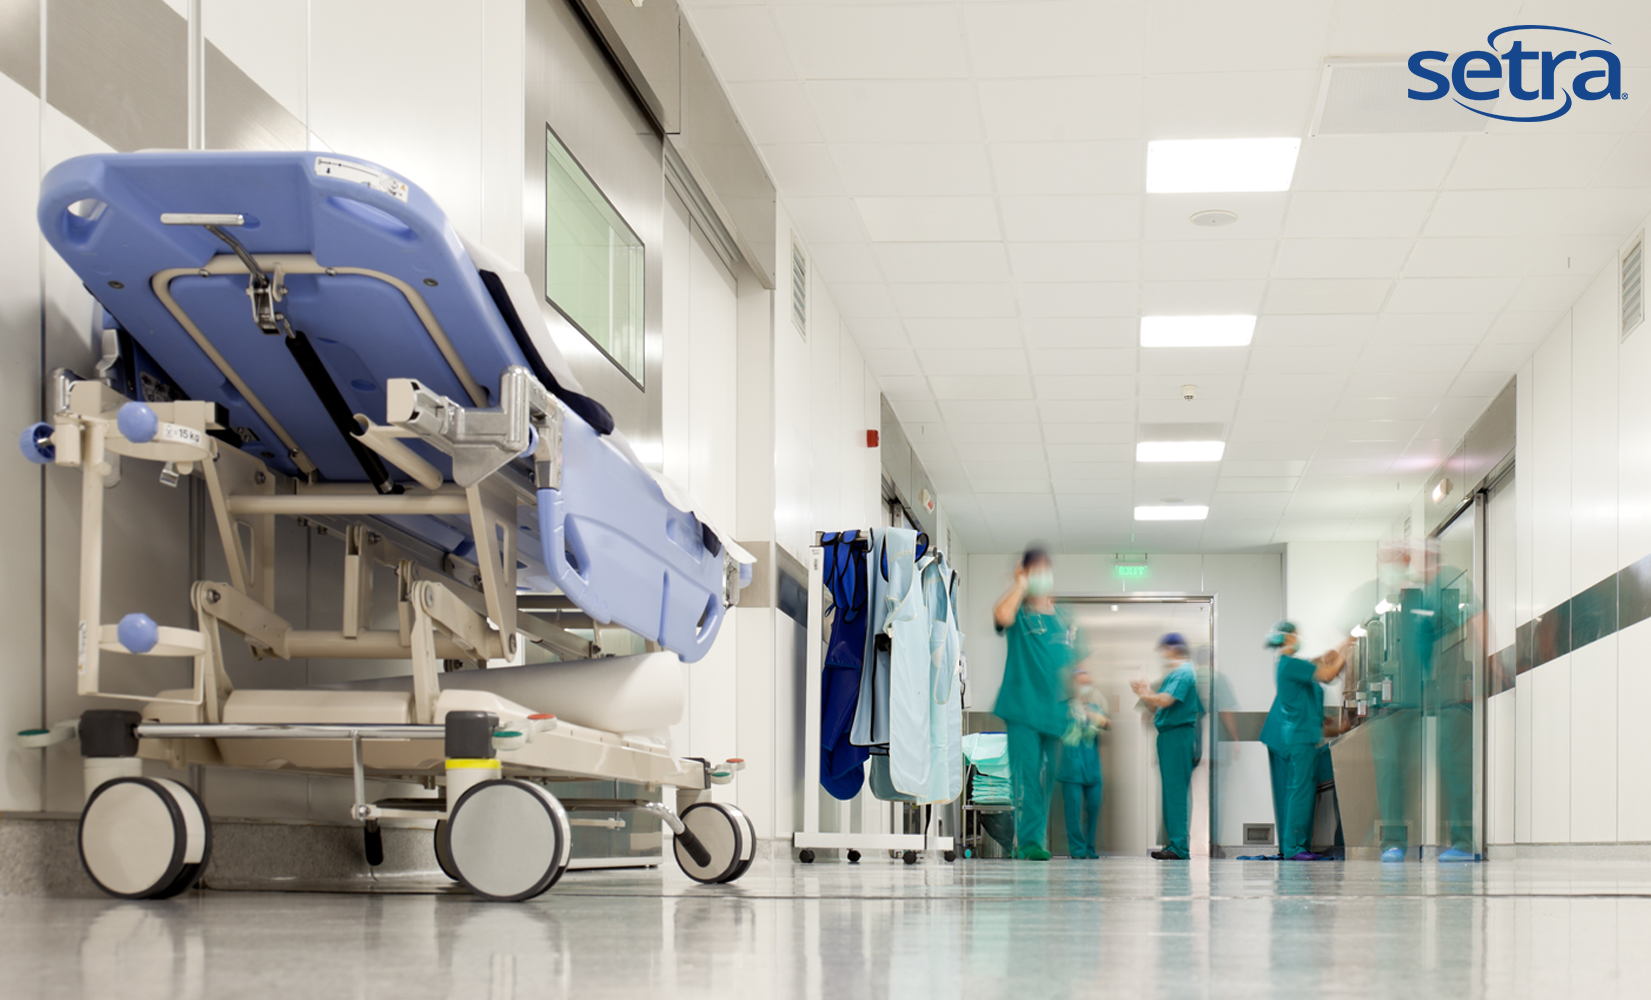 How do we know that hospitals are safe?